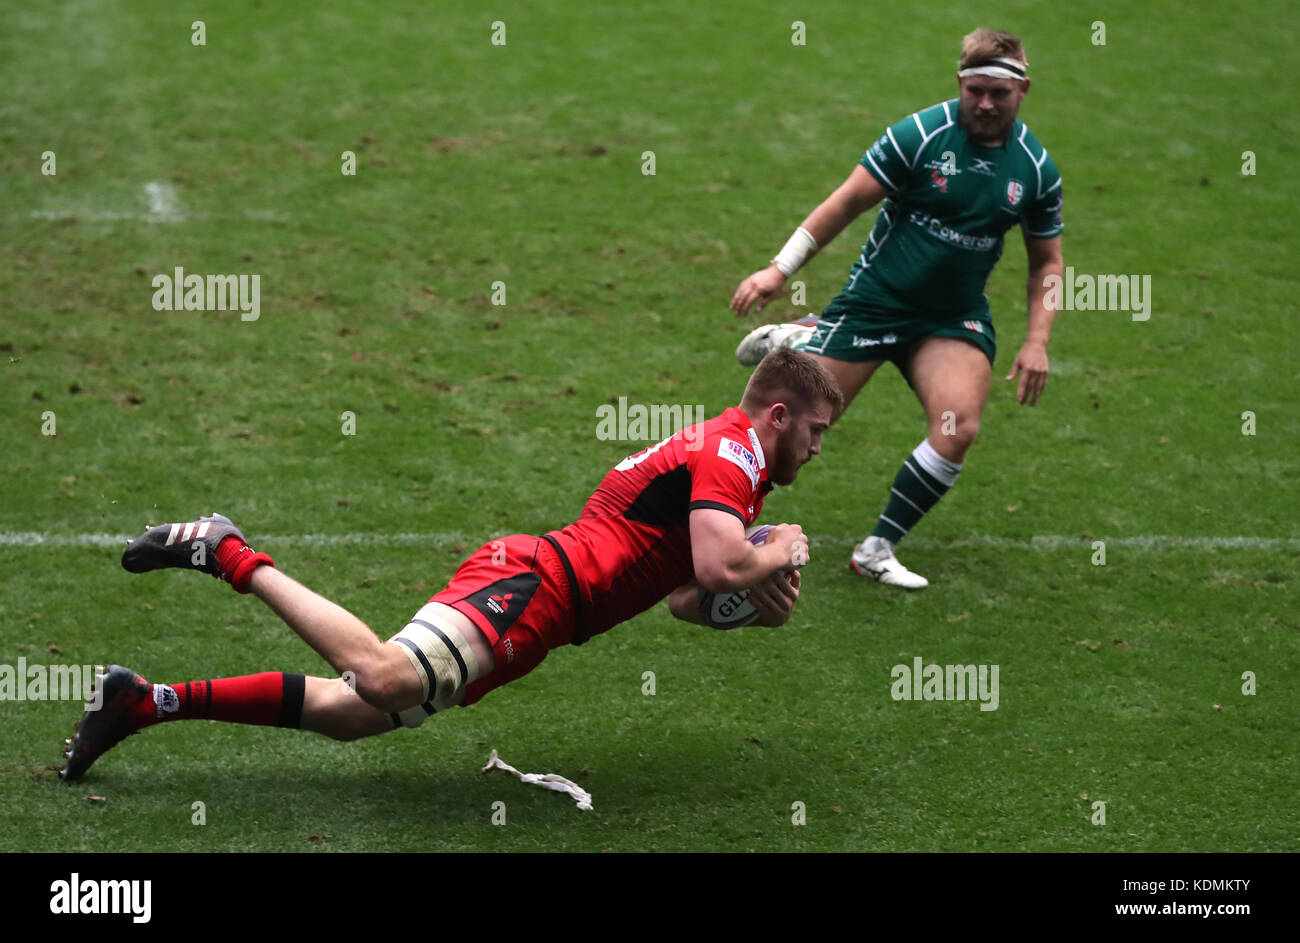 Edinburgh Rugby's Luke Crosbie dives in to score a try during the European Challenge Cup pool four match at the Madejski Stadium, Reading. Stock Photo